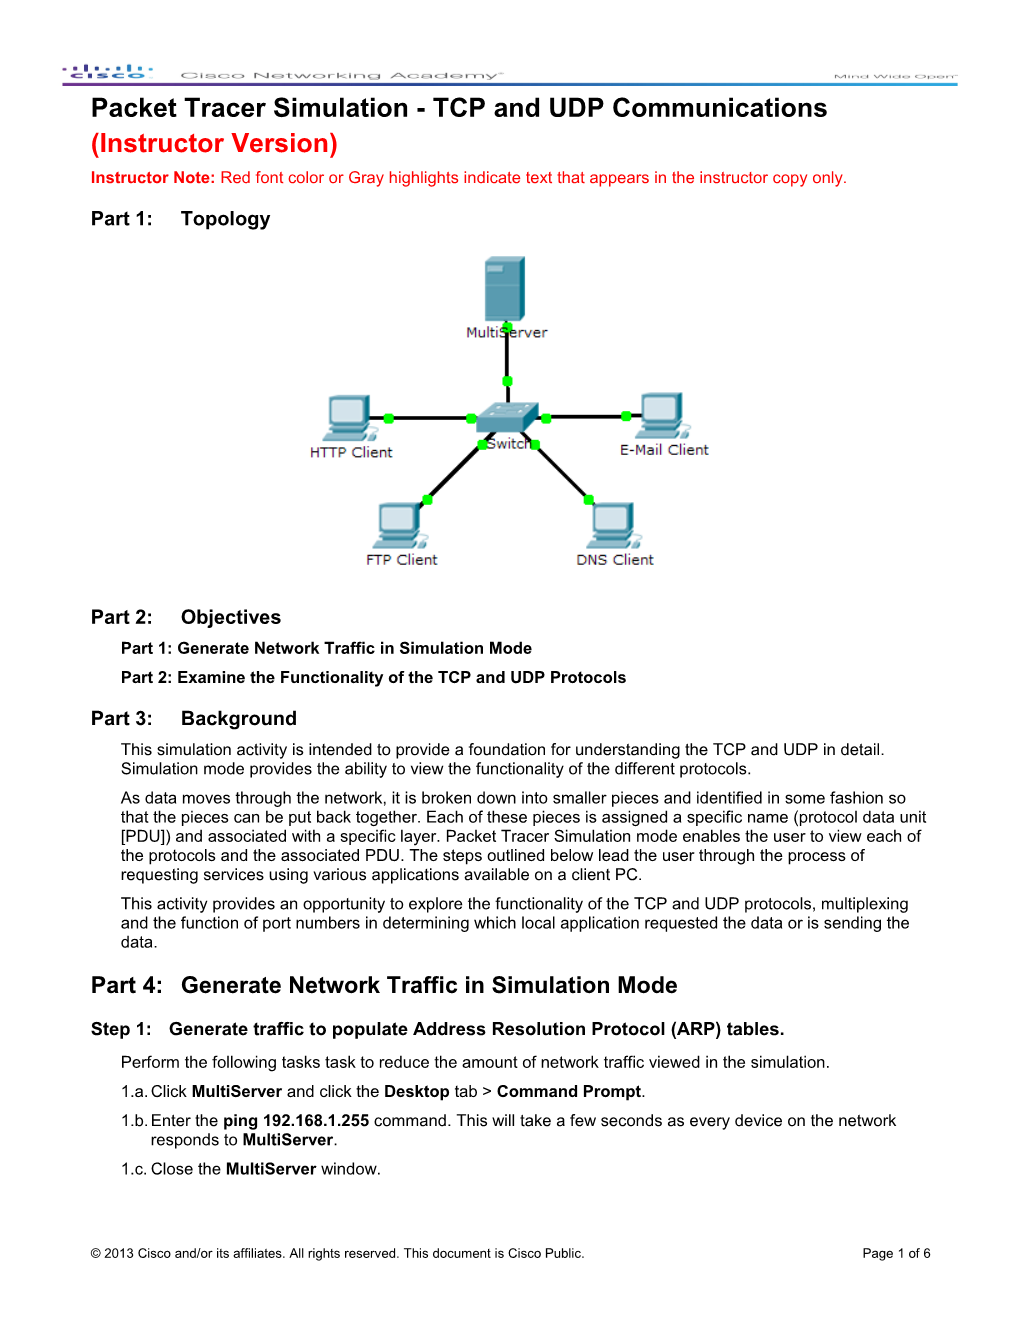 Packet Tracer Simulation - TCP and UDP Communications